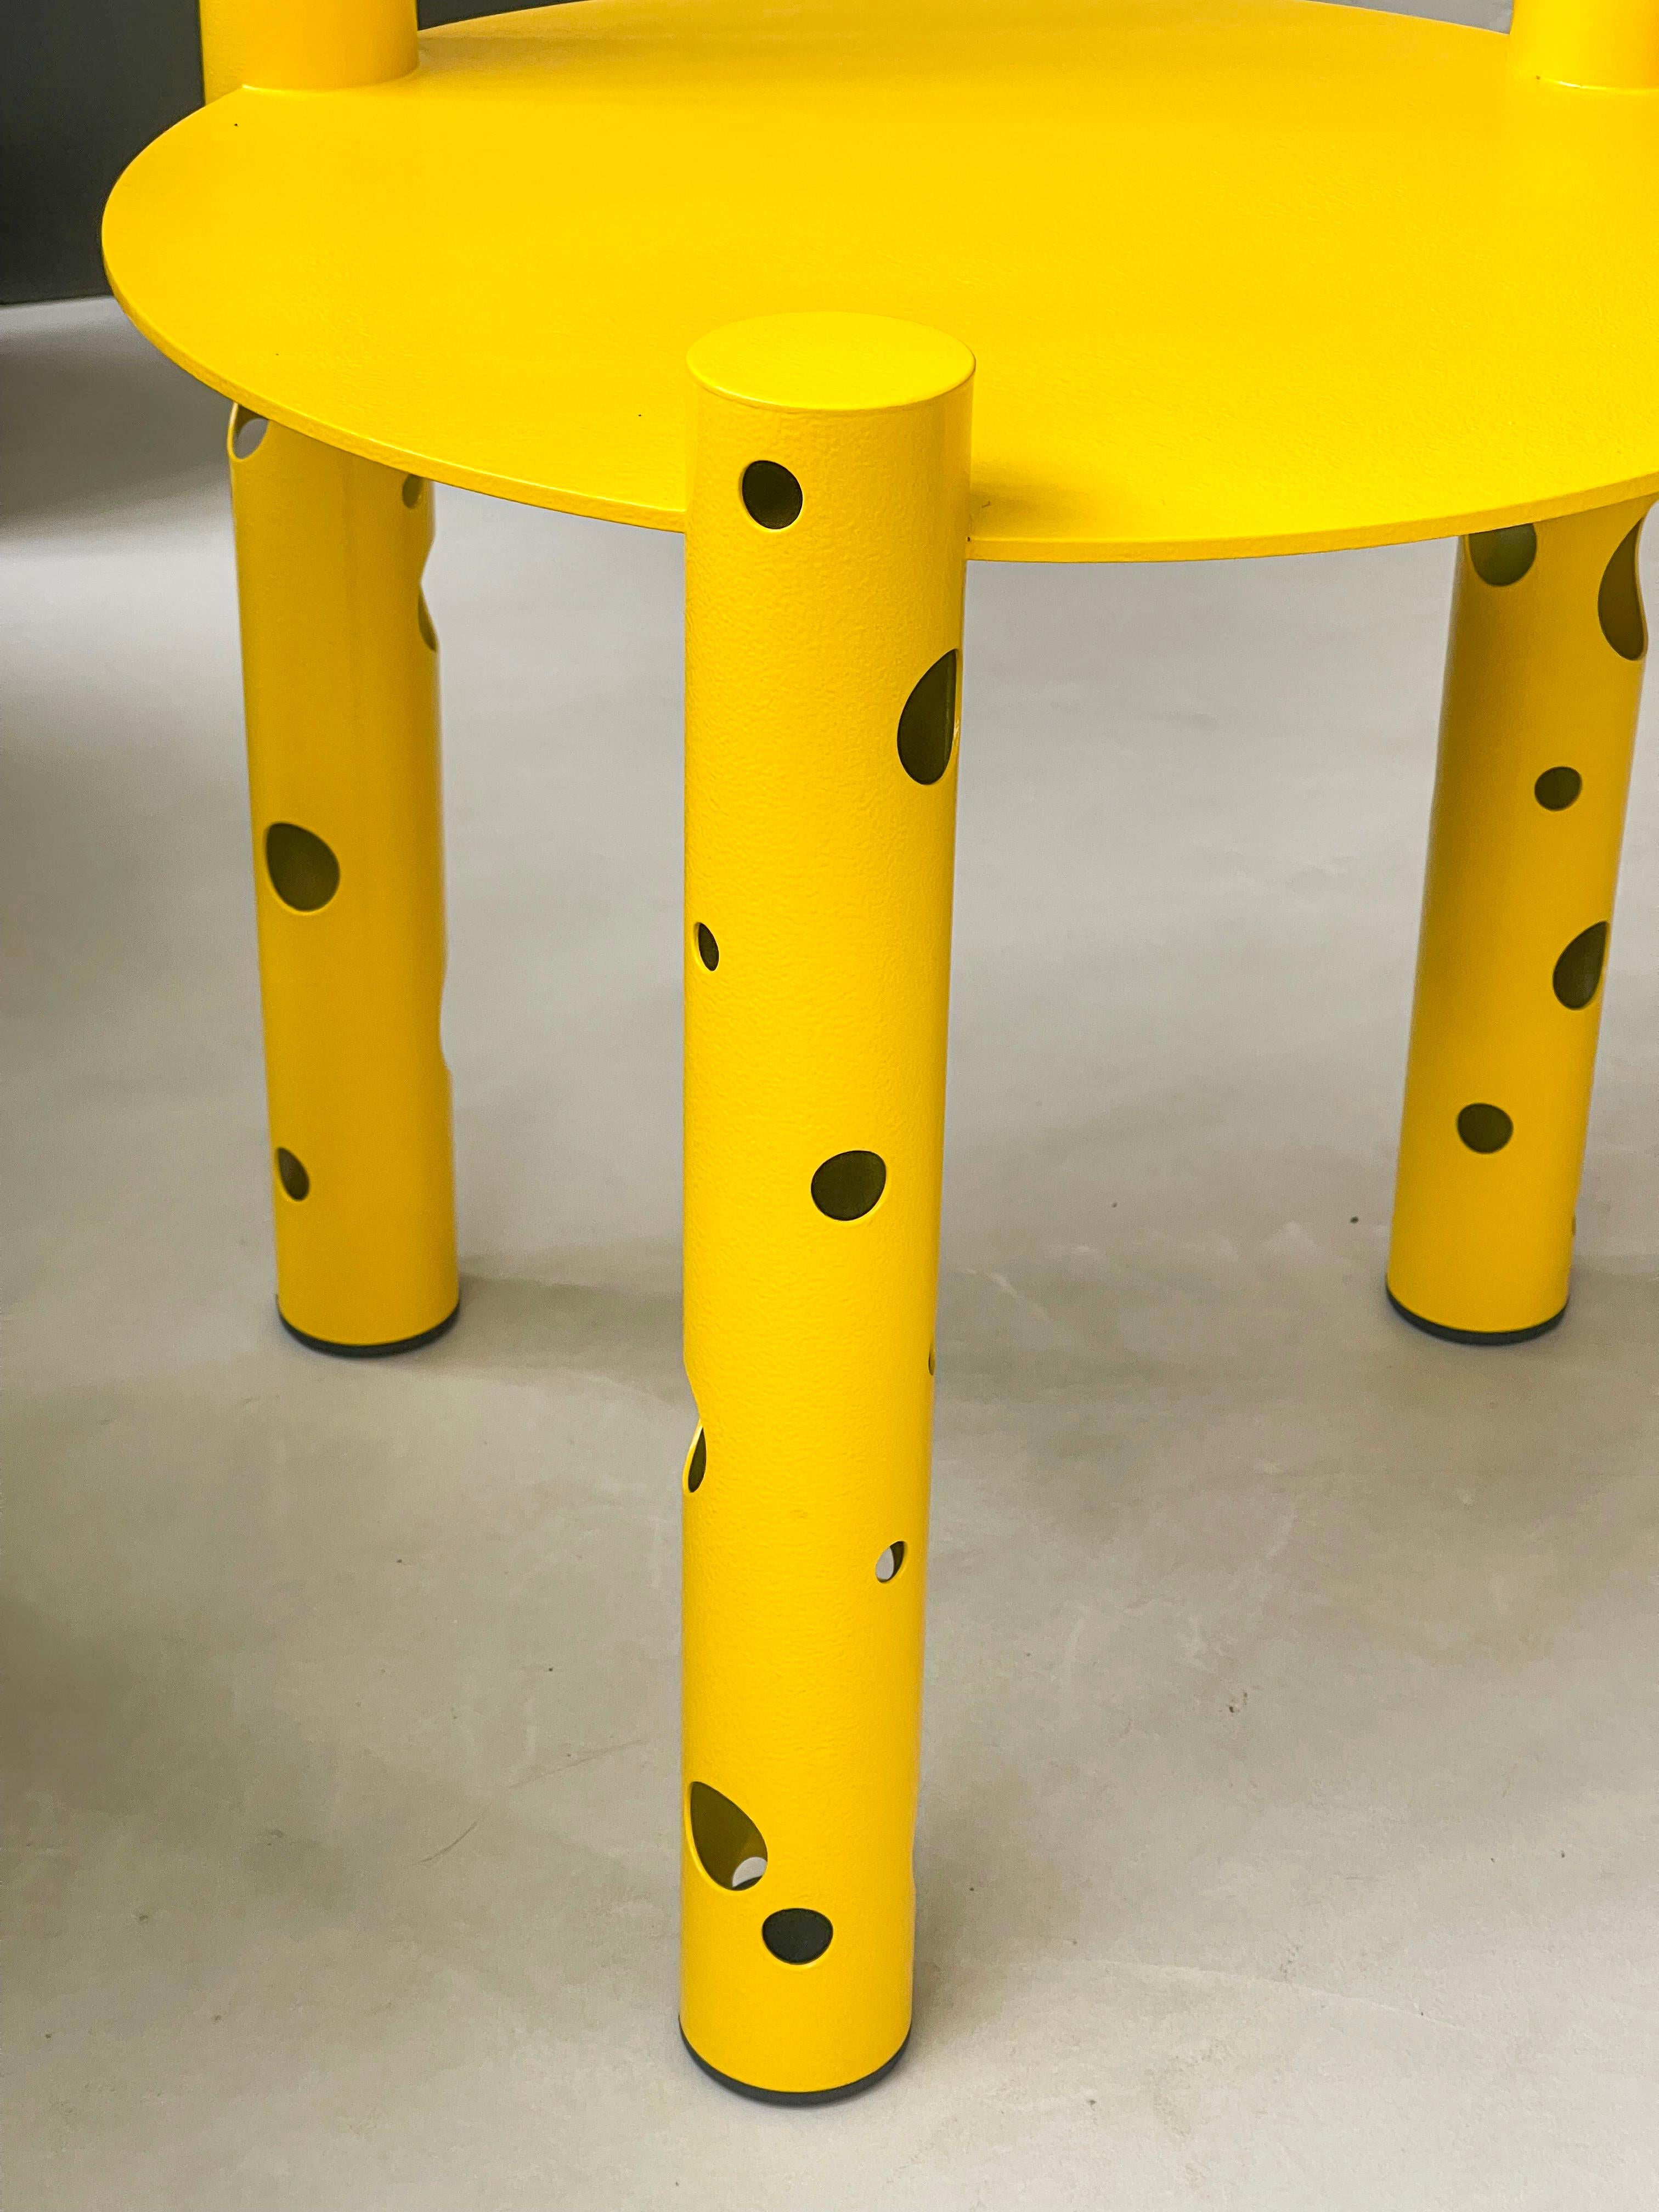 Spinzi SIlös Chair, Collectible Italian Design, Bright Yellow Sculptural Seating For Sale 3